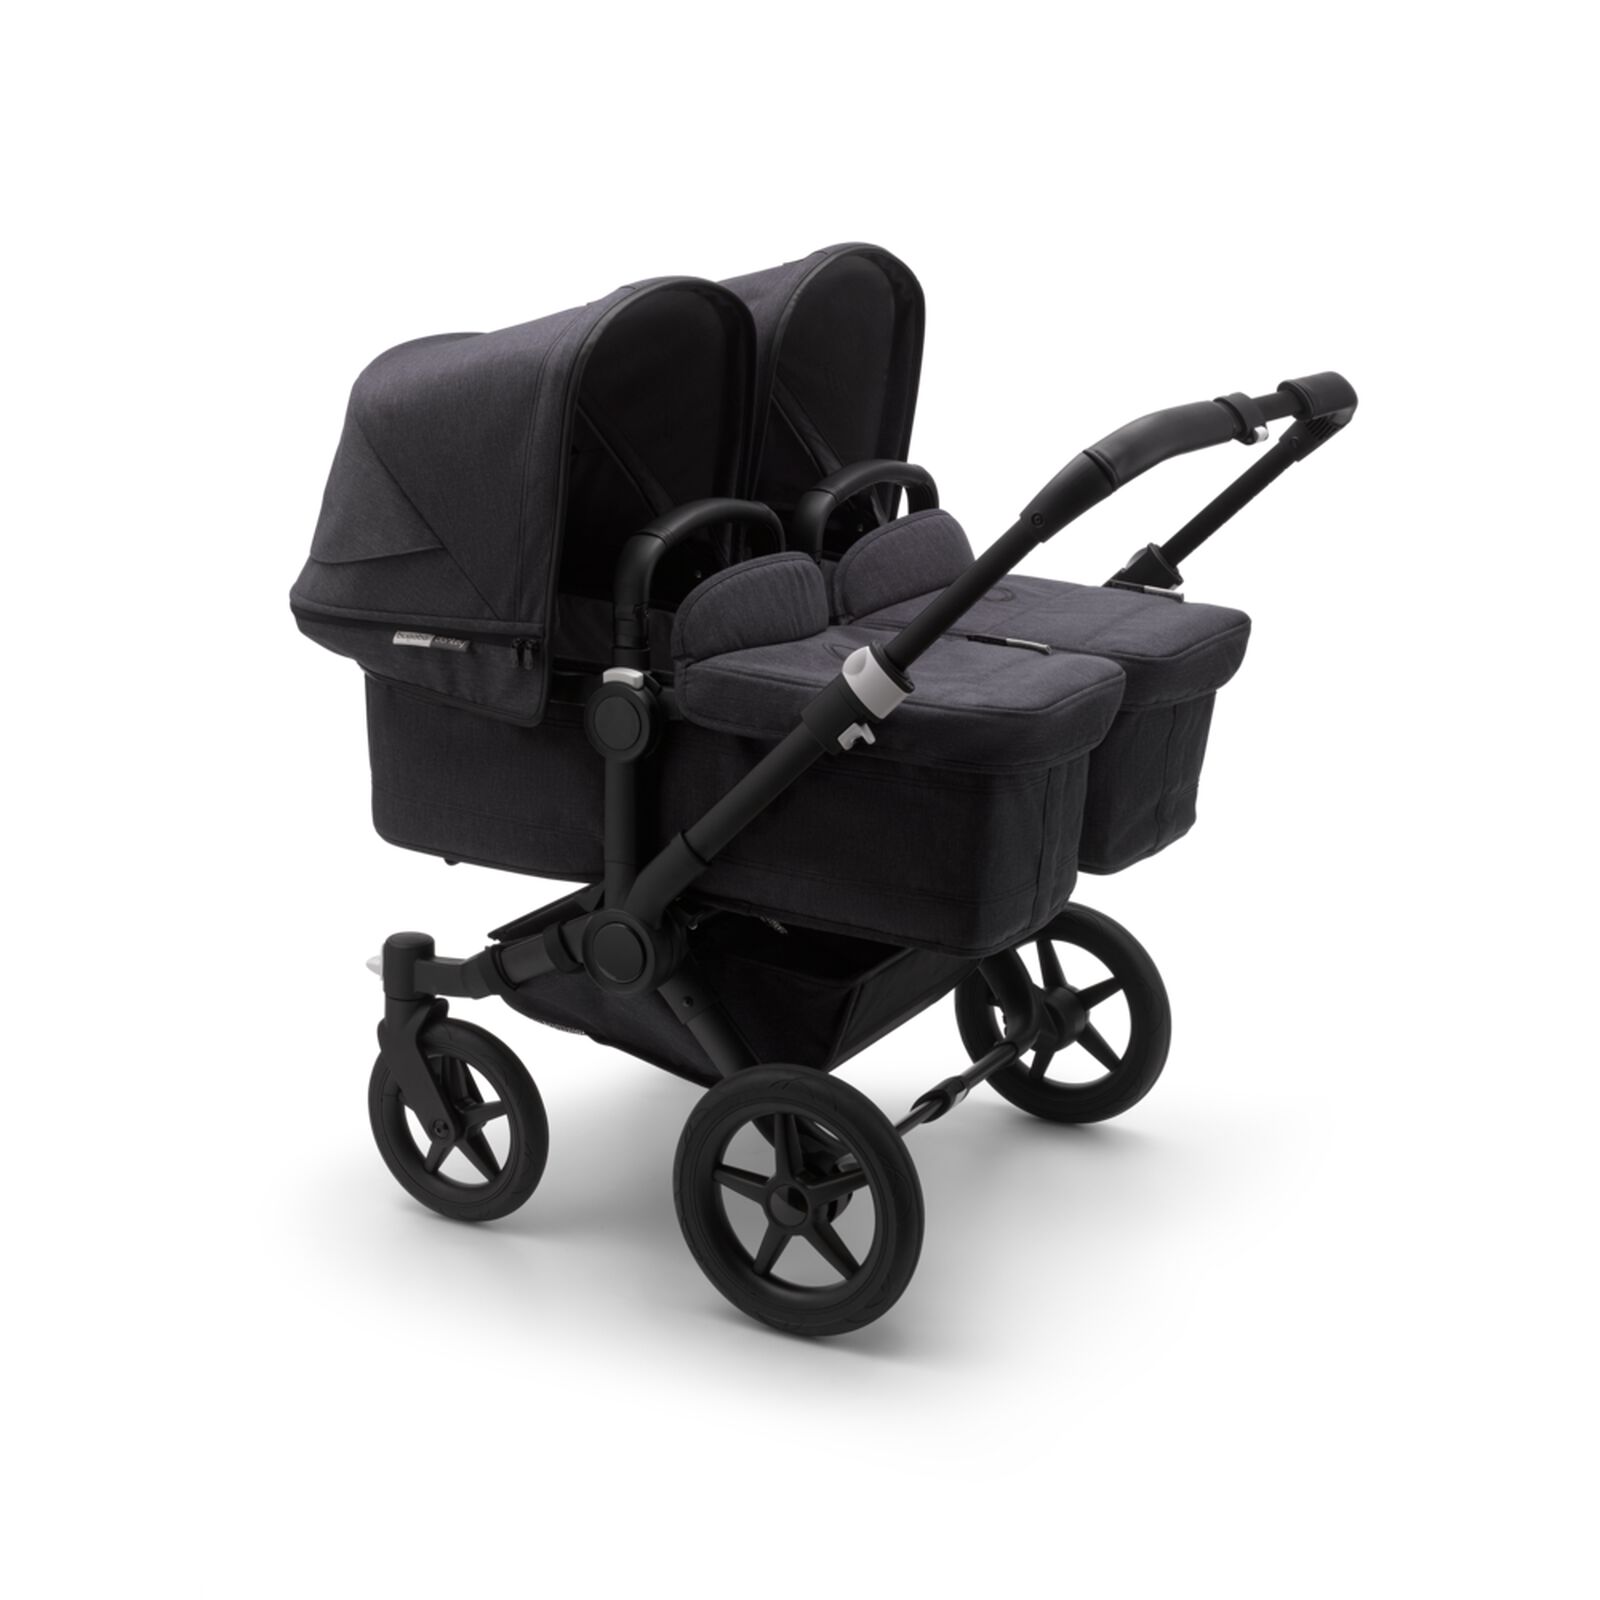 Bugaboo Donkey 3 Twin carrycot and seat pushchair - View 1